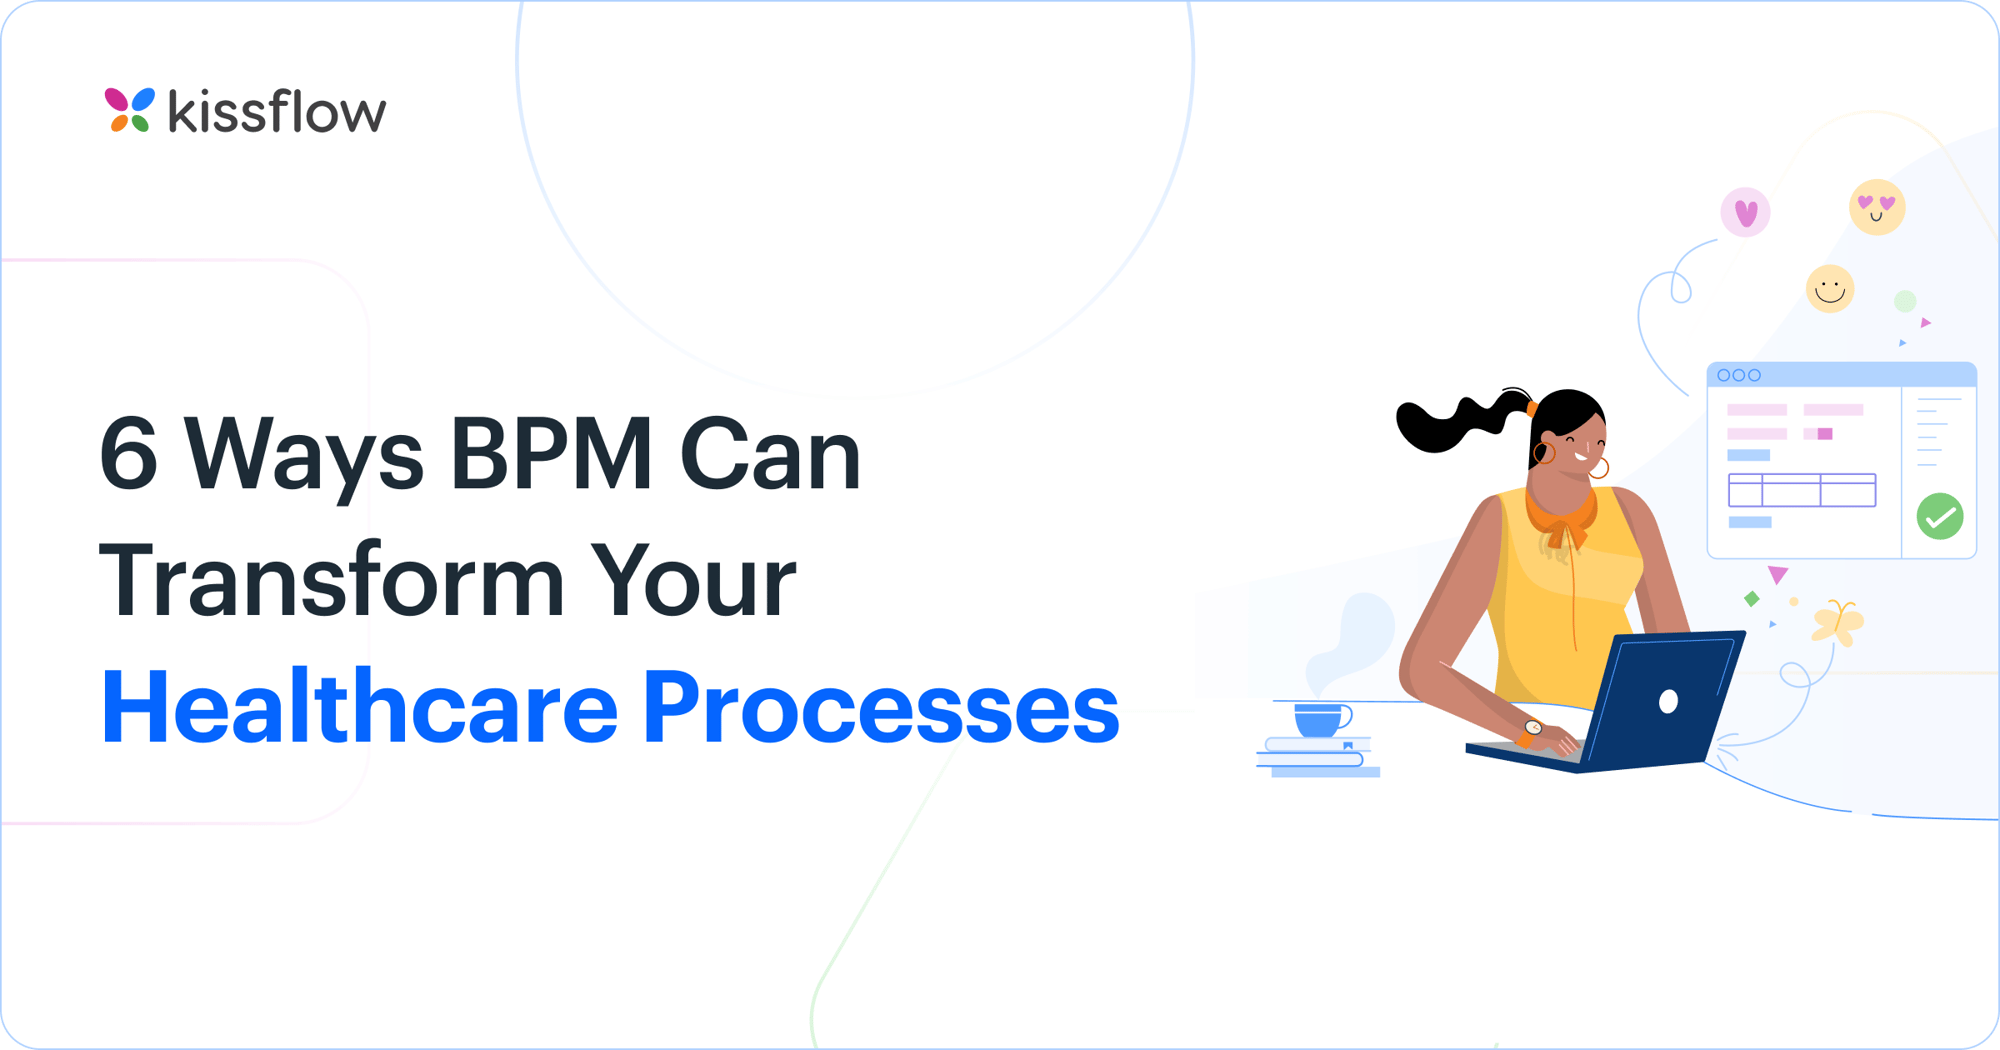 6 Ways BPM Can Transform Your Healthcare Processes